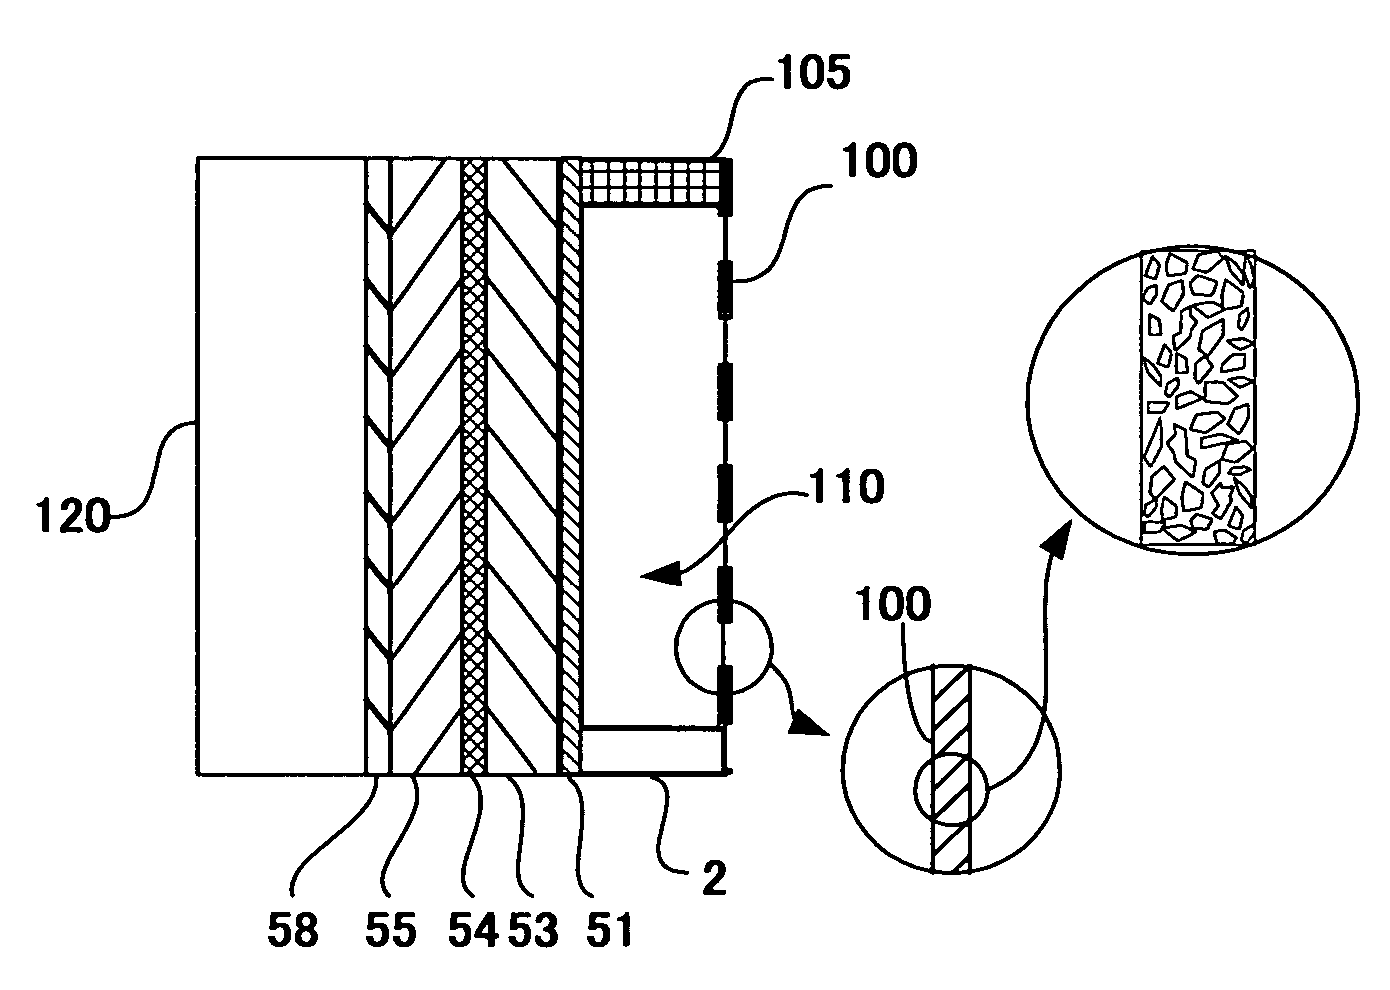 Fuel cell system, electrical apparatus and method for recovering water formed in fuel cell system